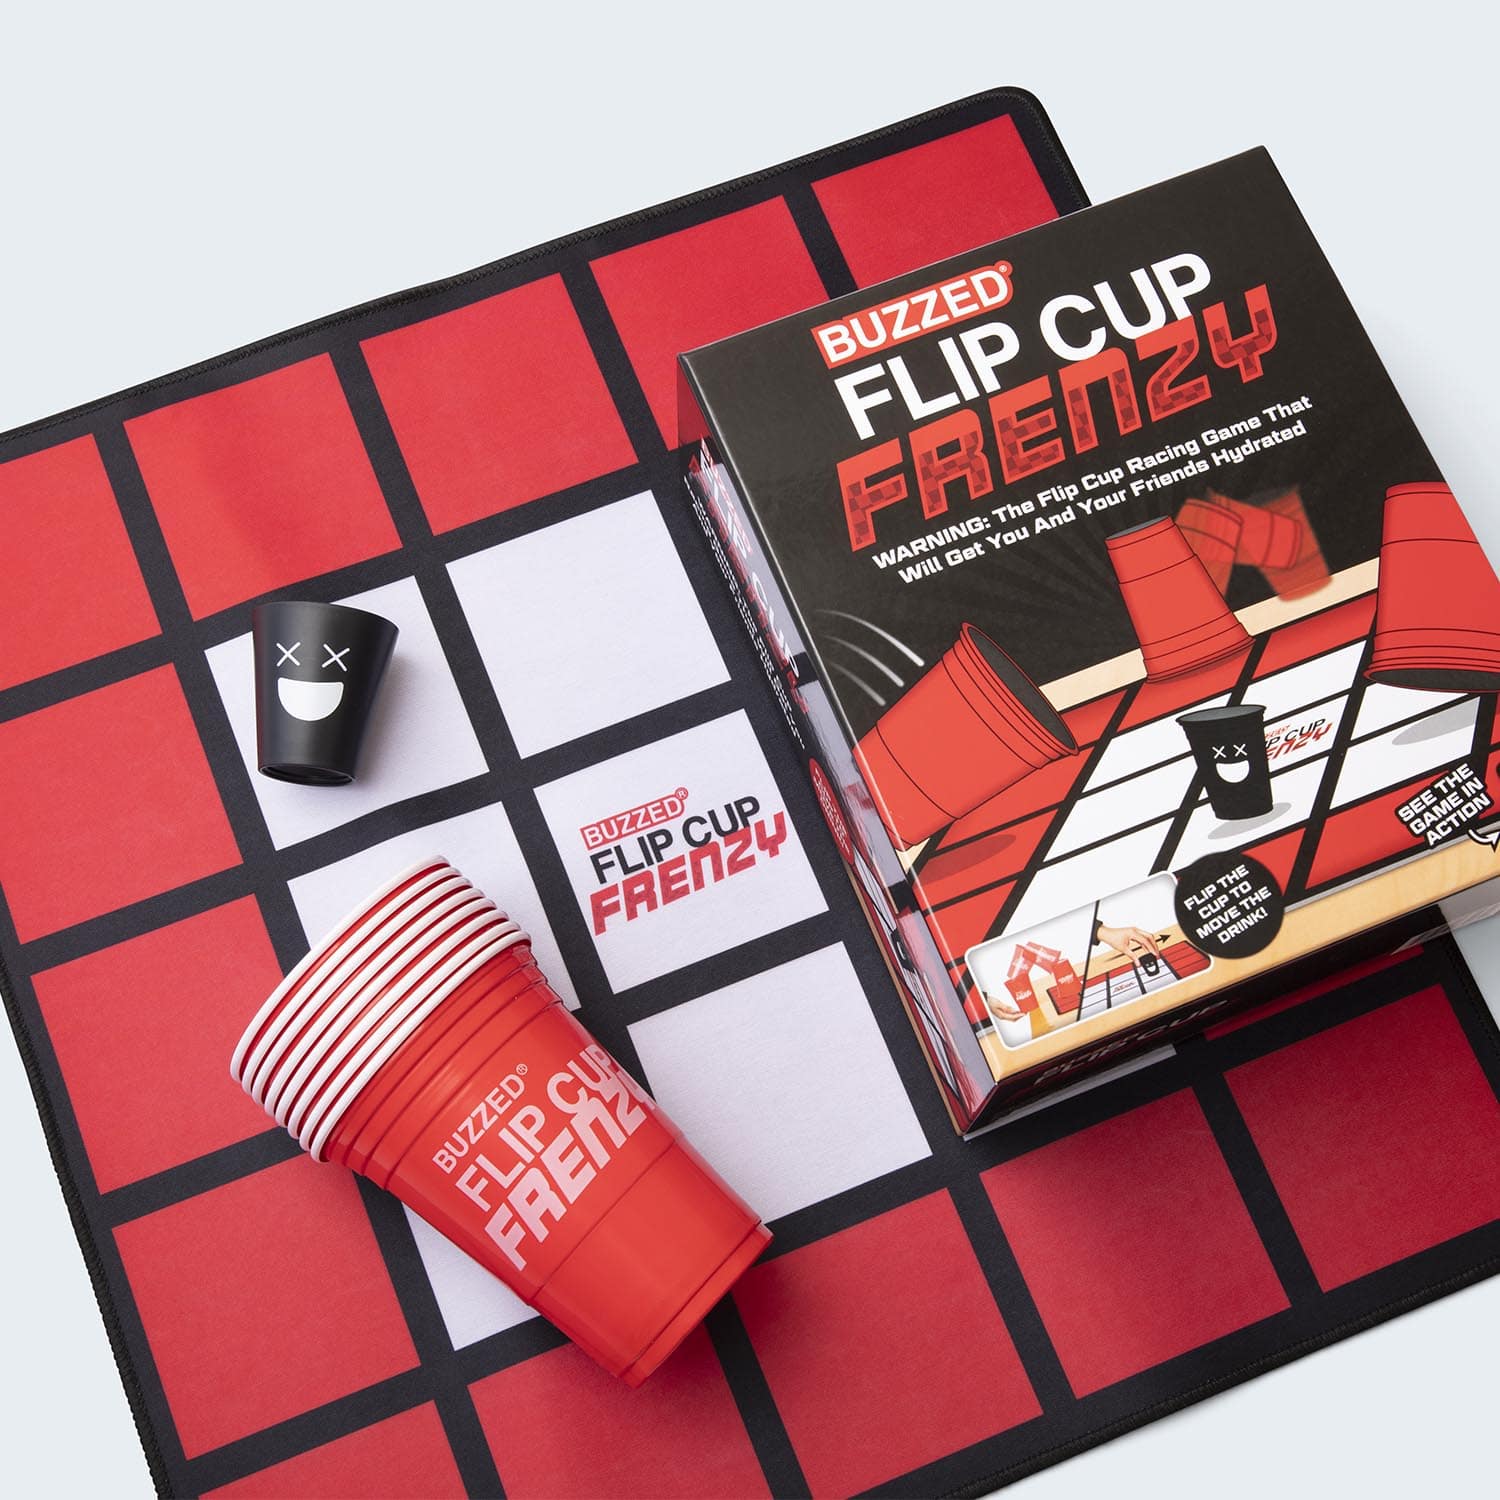 buzzed-flip-cup-frenzy-game-box-and-game-play-05-what-do-you-meme-by-relatable